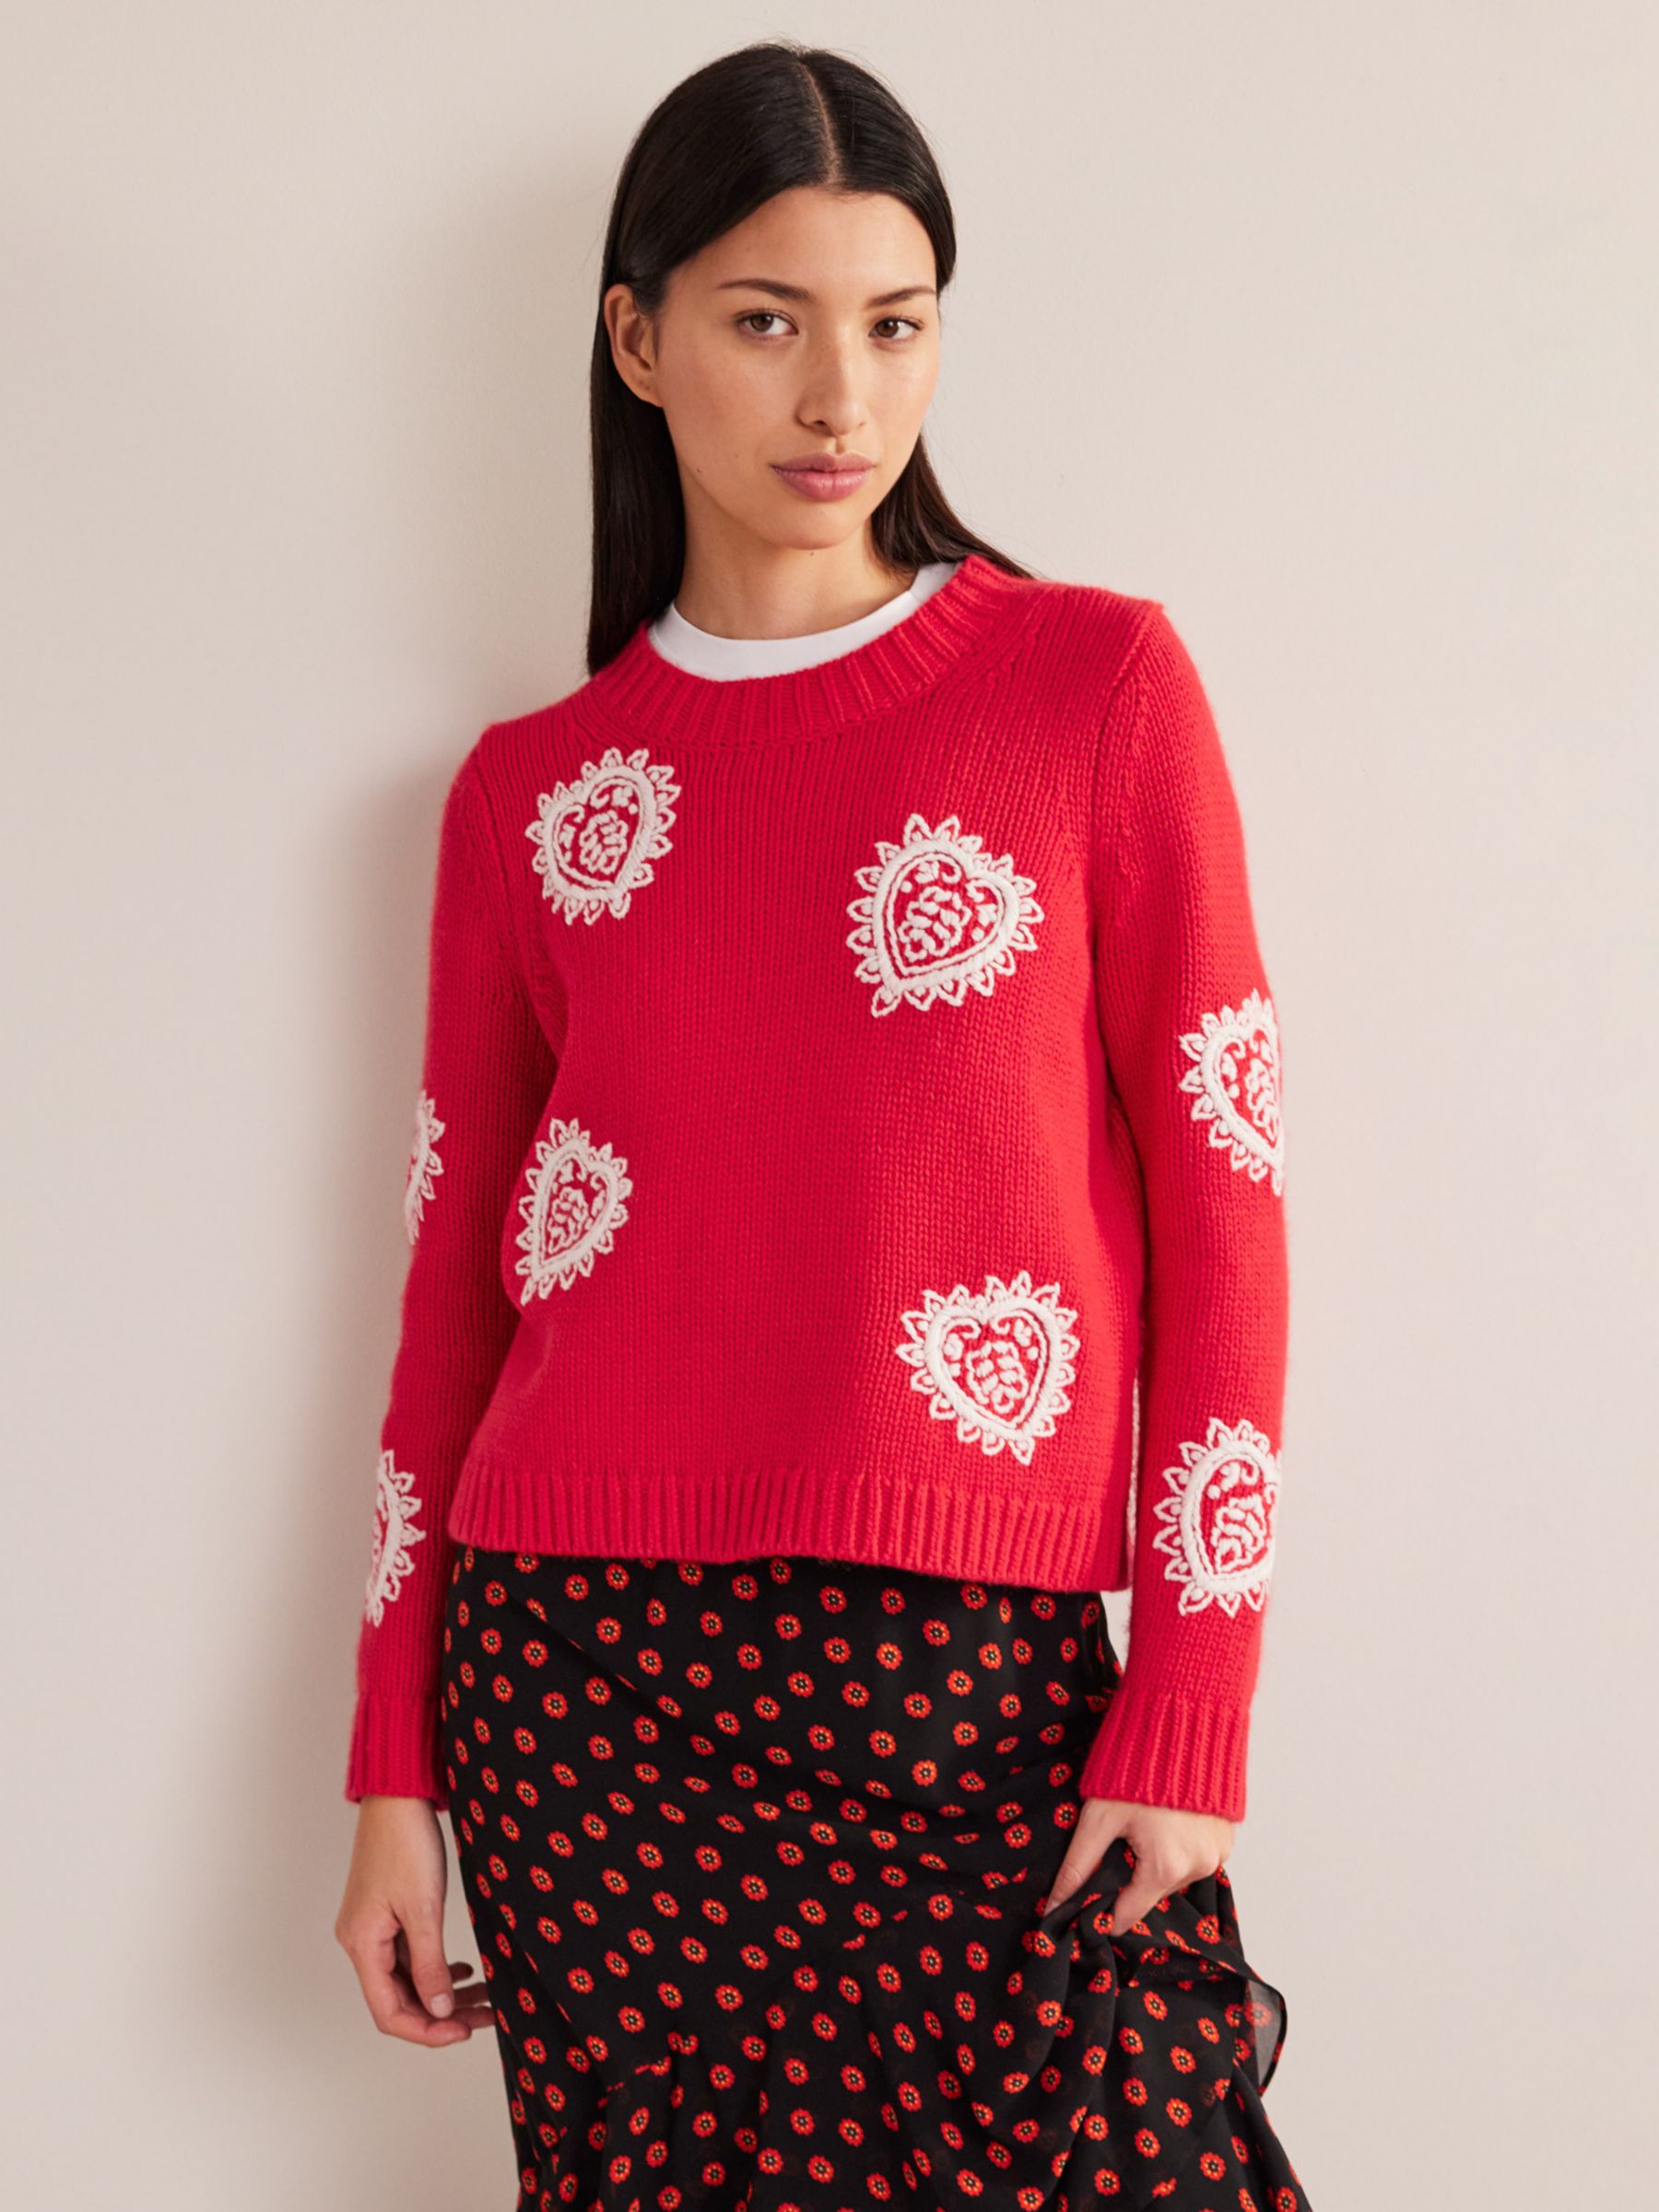 Boden Embroidered Hearts Chunky Knit Jumper, Strawberry Tart Red, XS